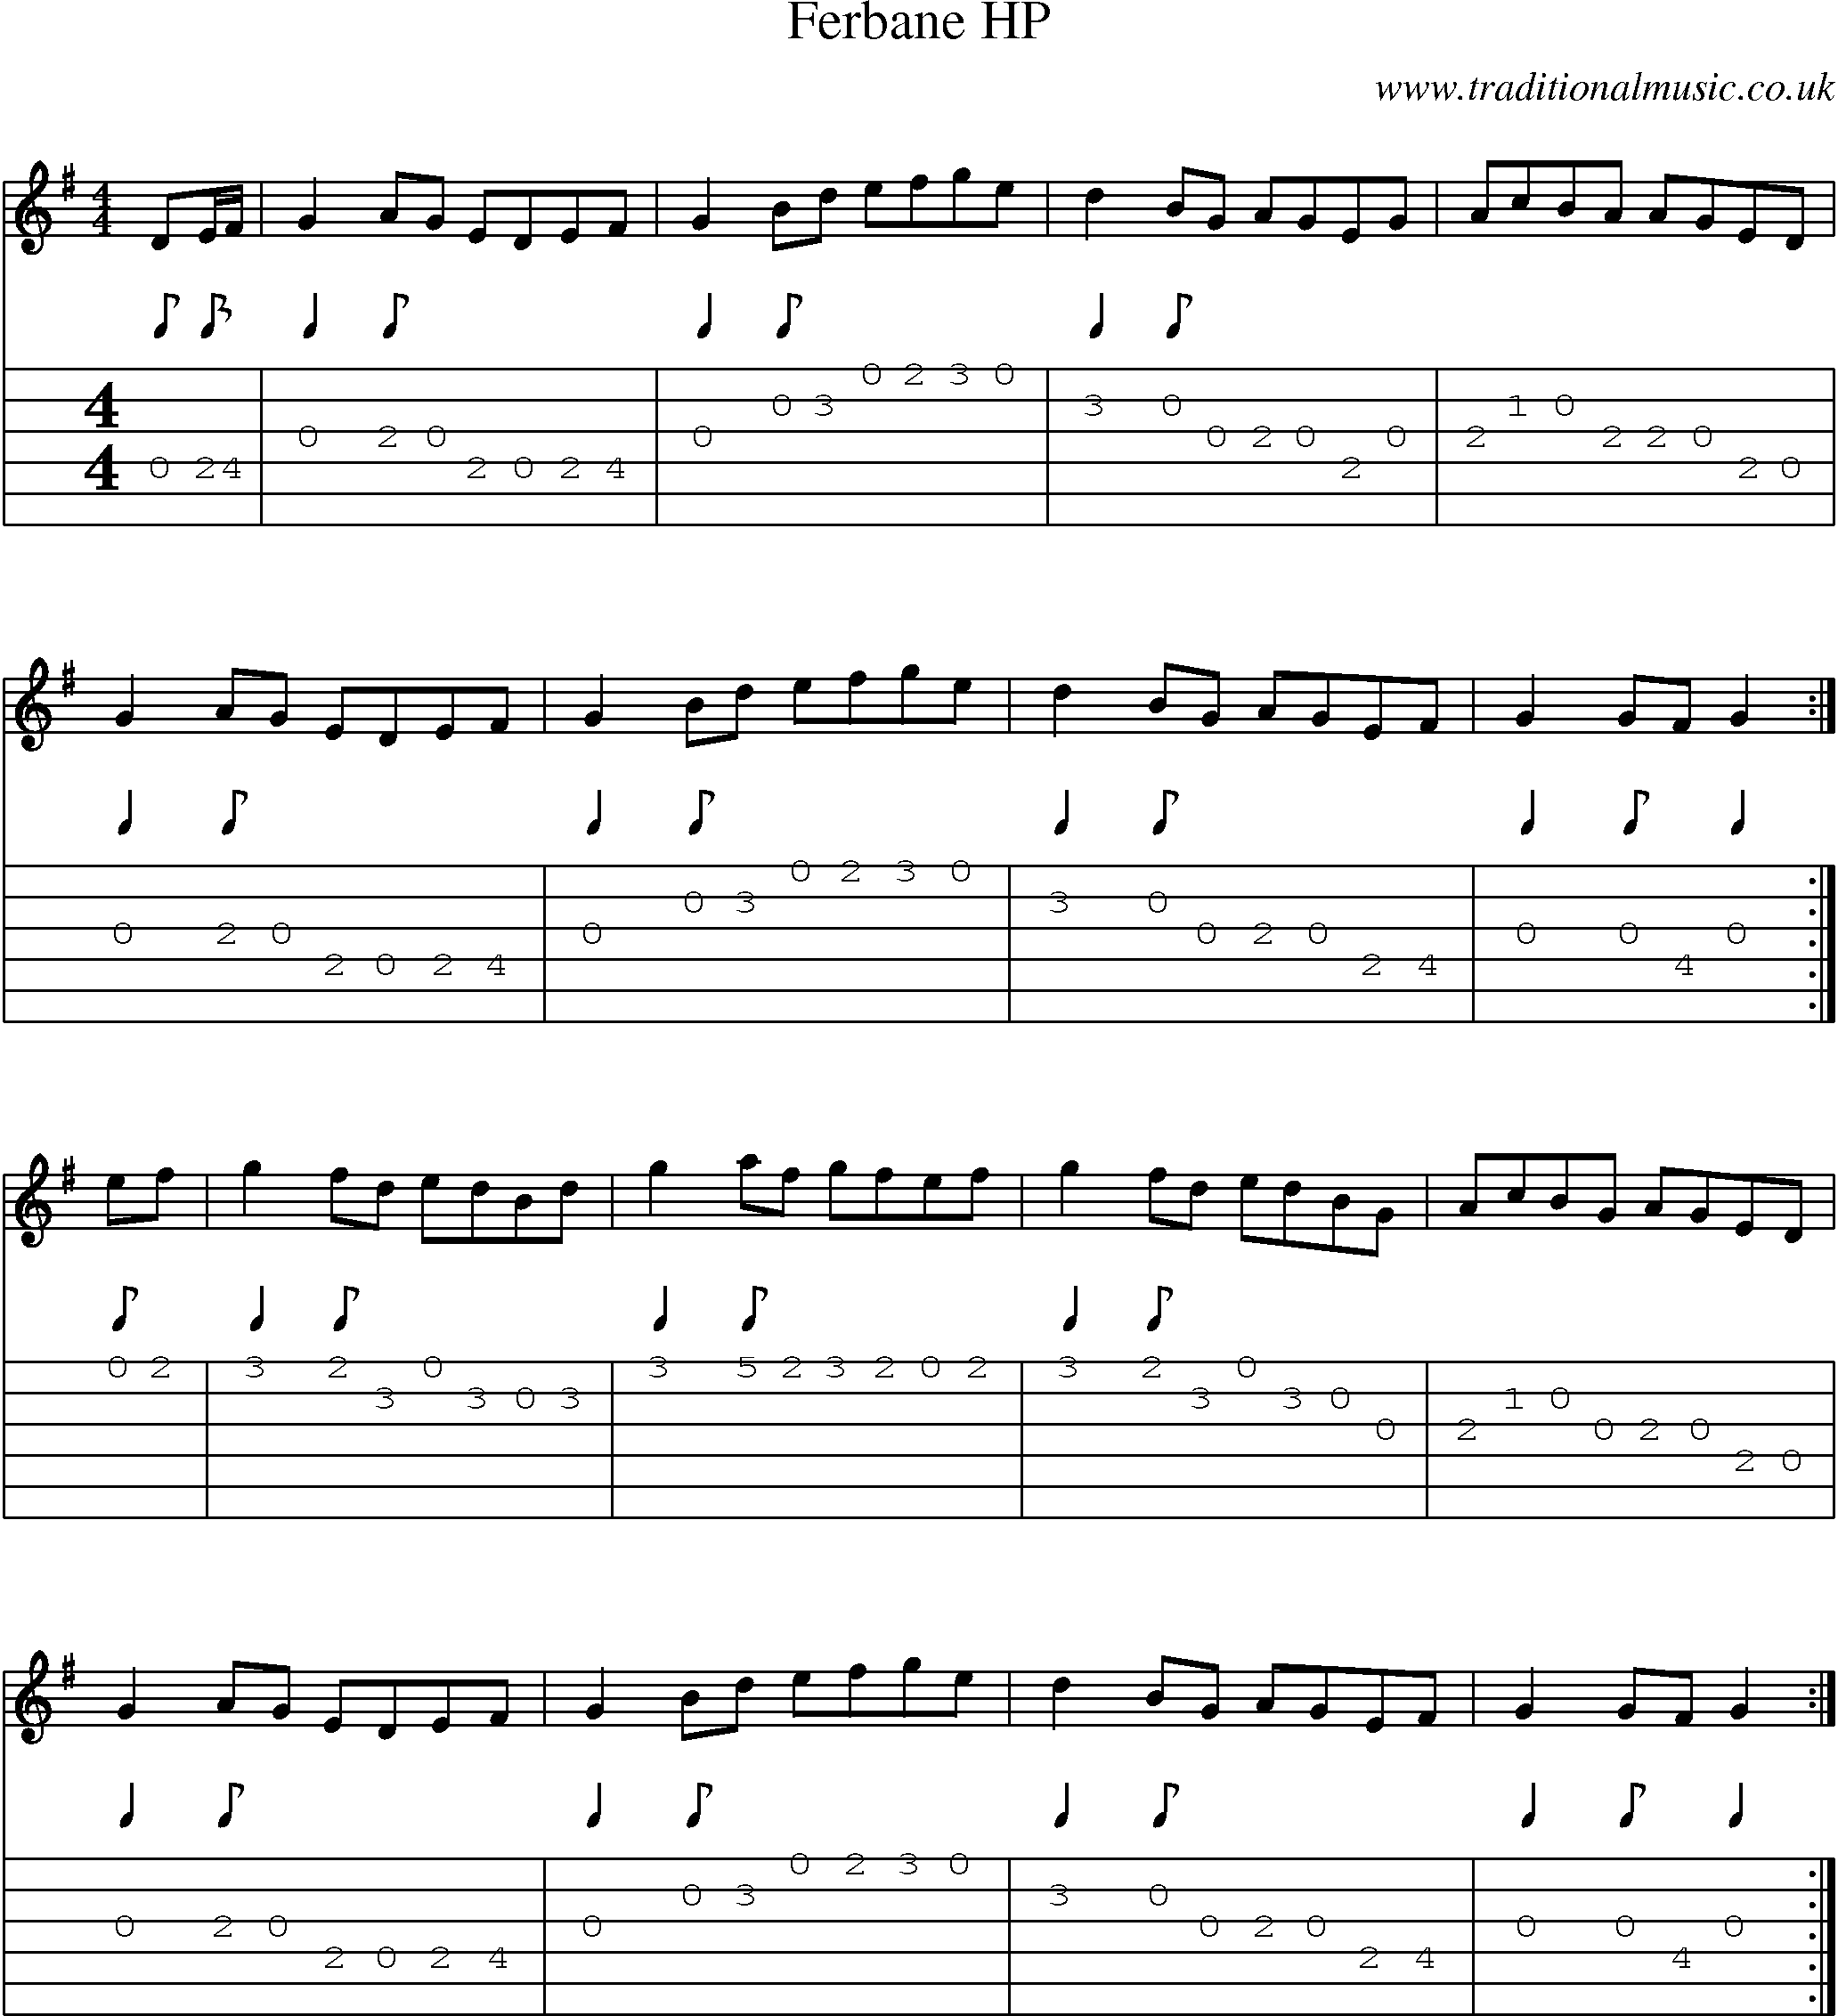 Music Score and Guitar Tabs for Ferbane